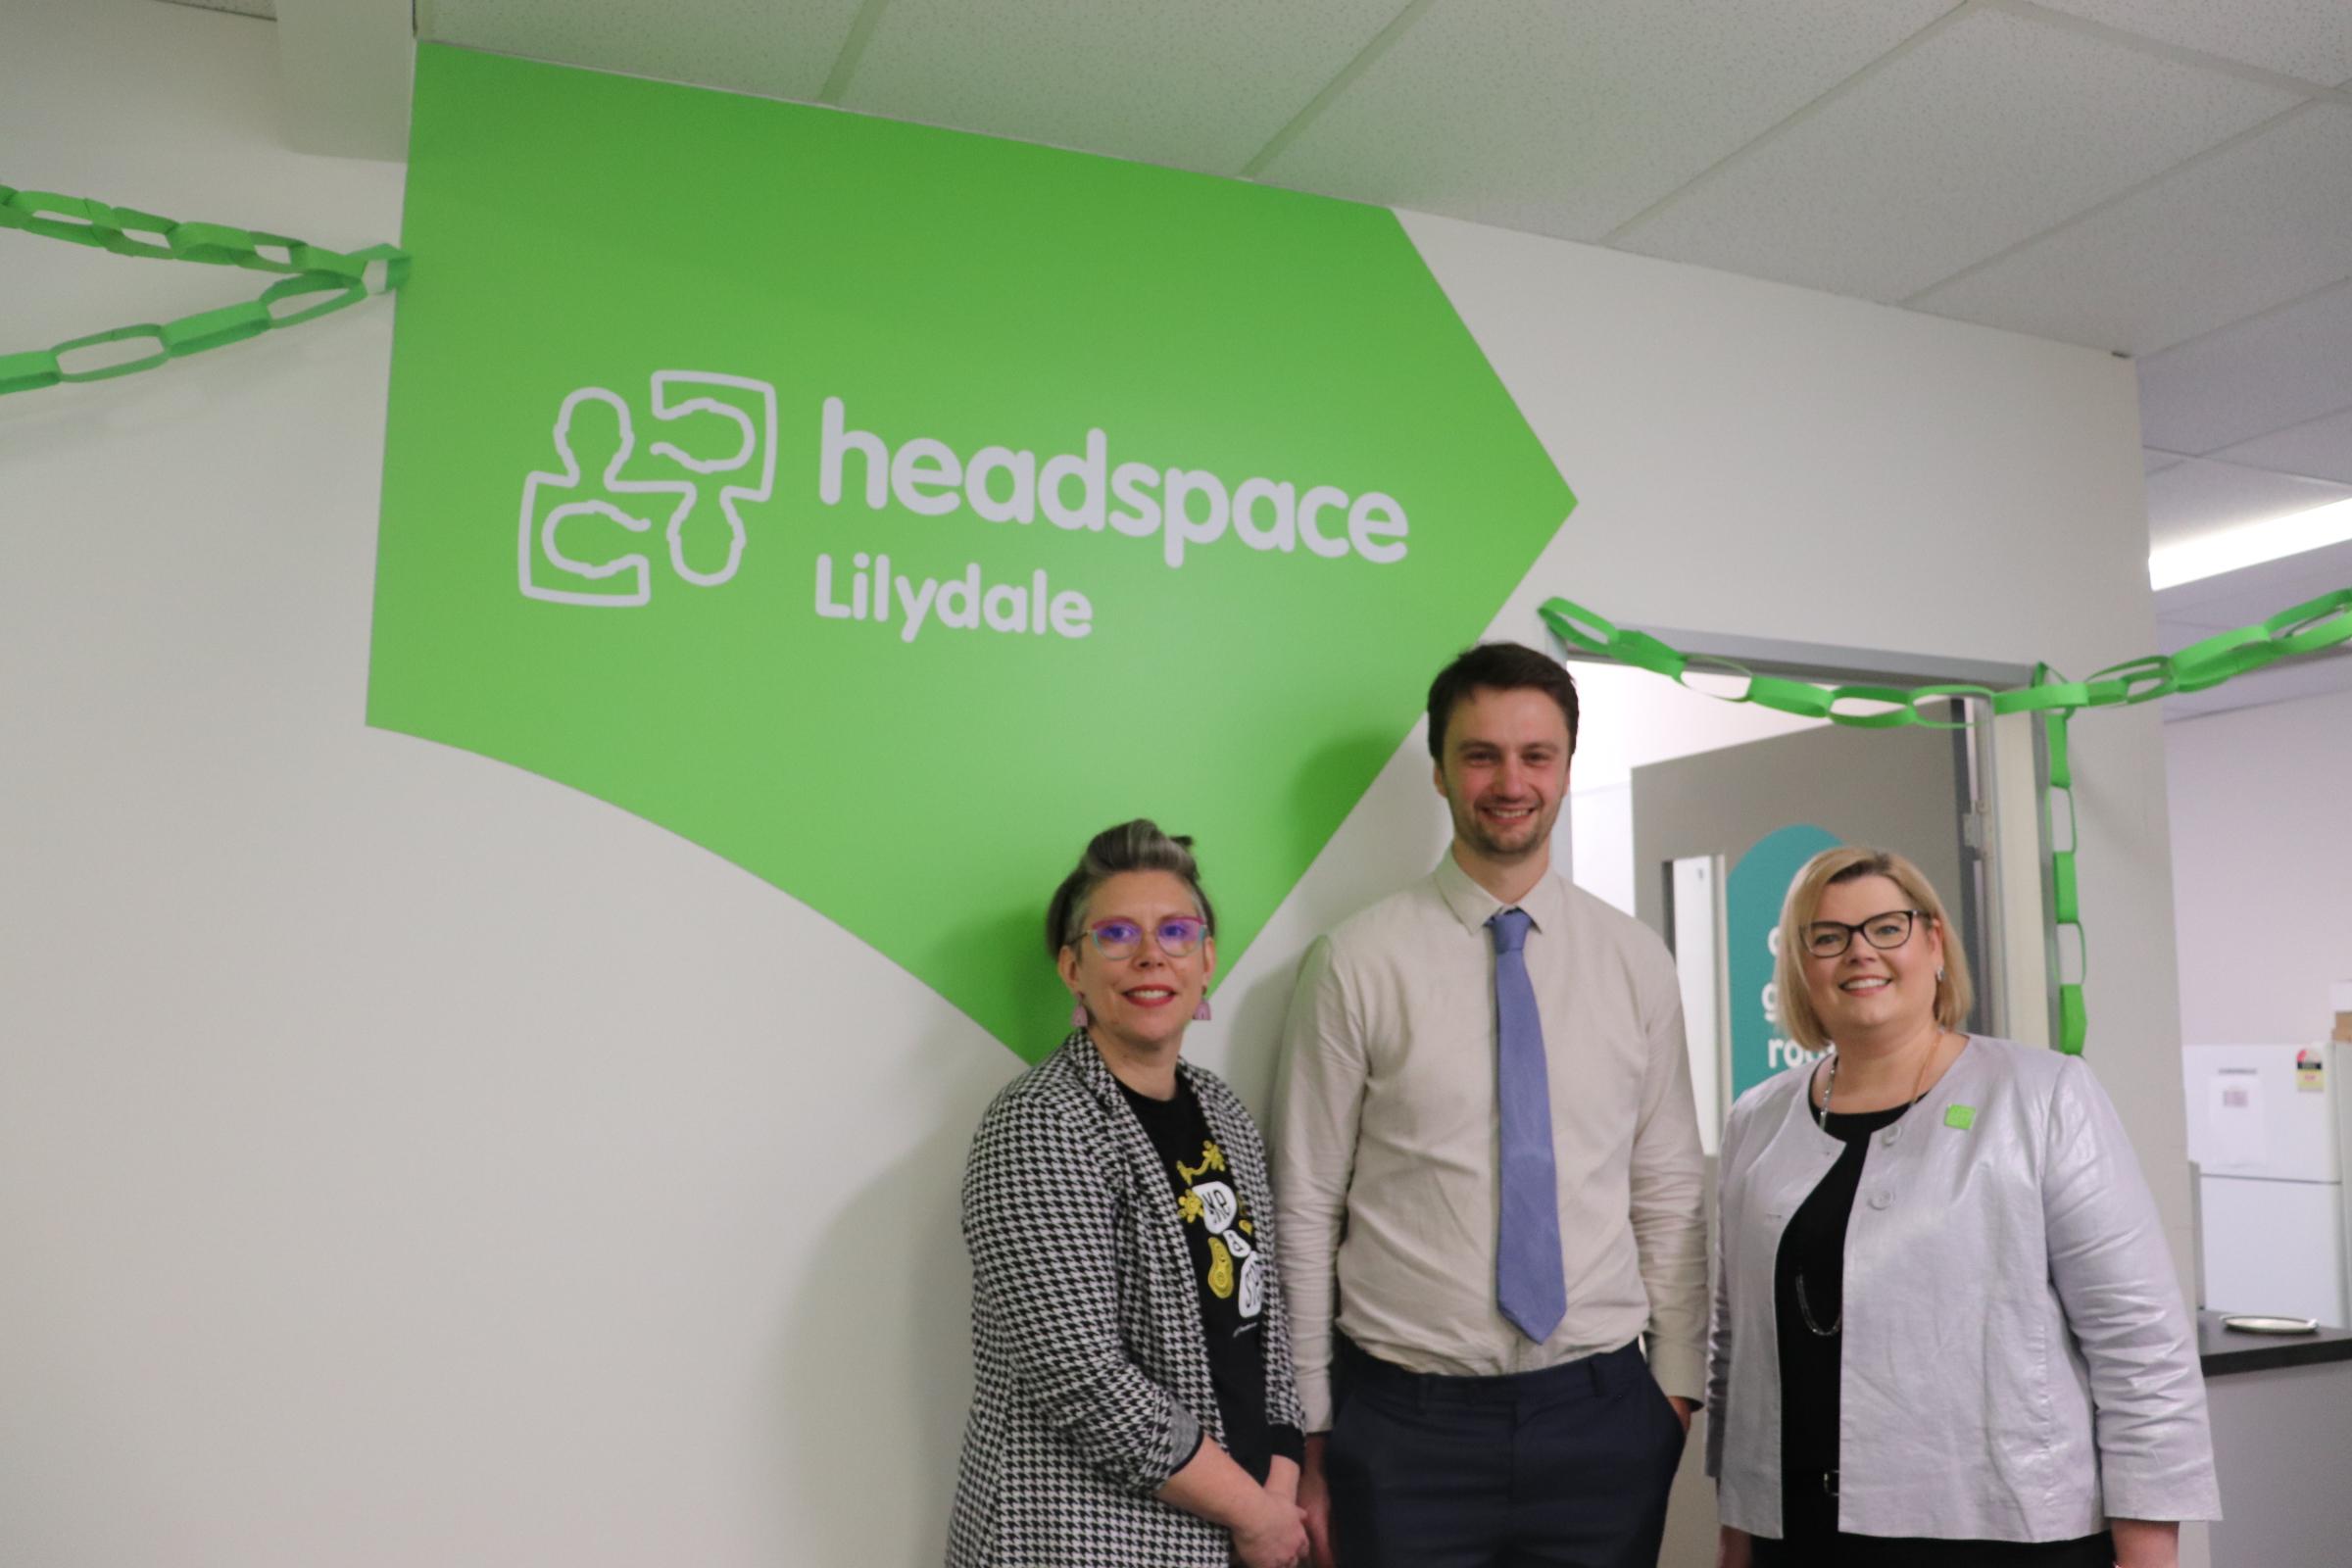 Celebrating headspace Lilydale's first birthday and official launch